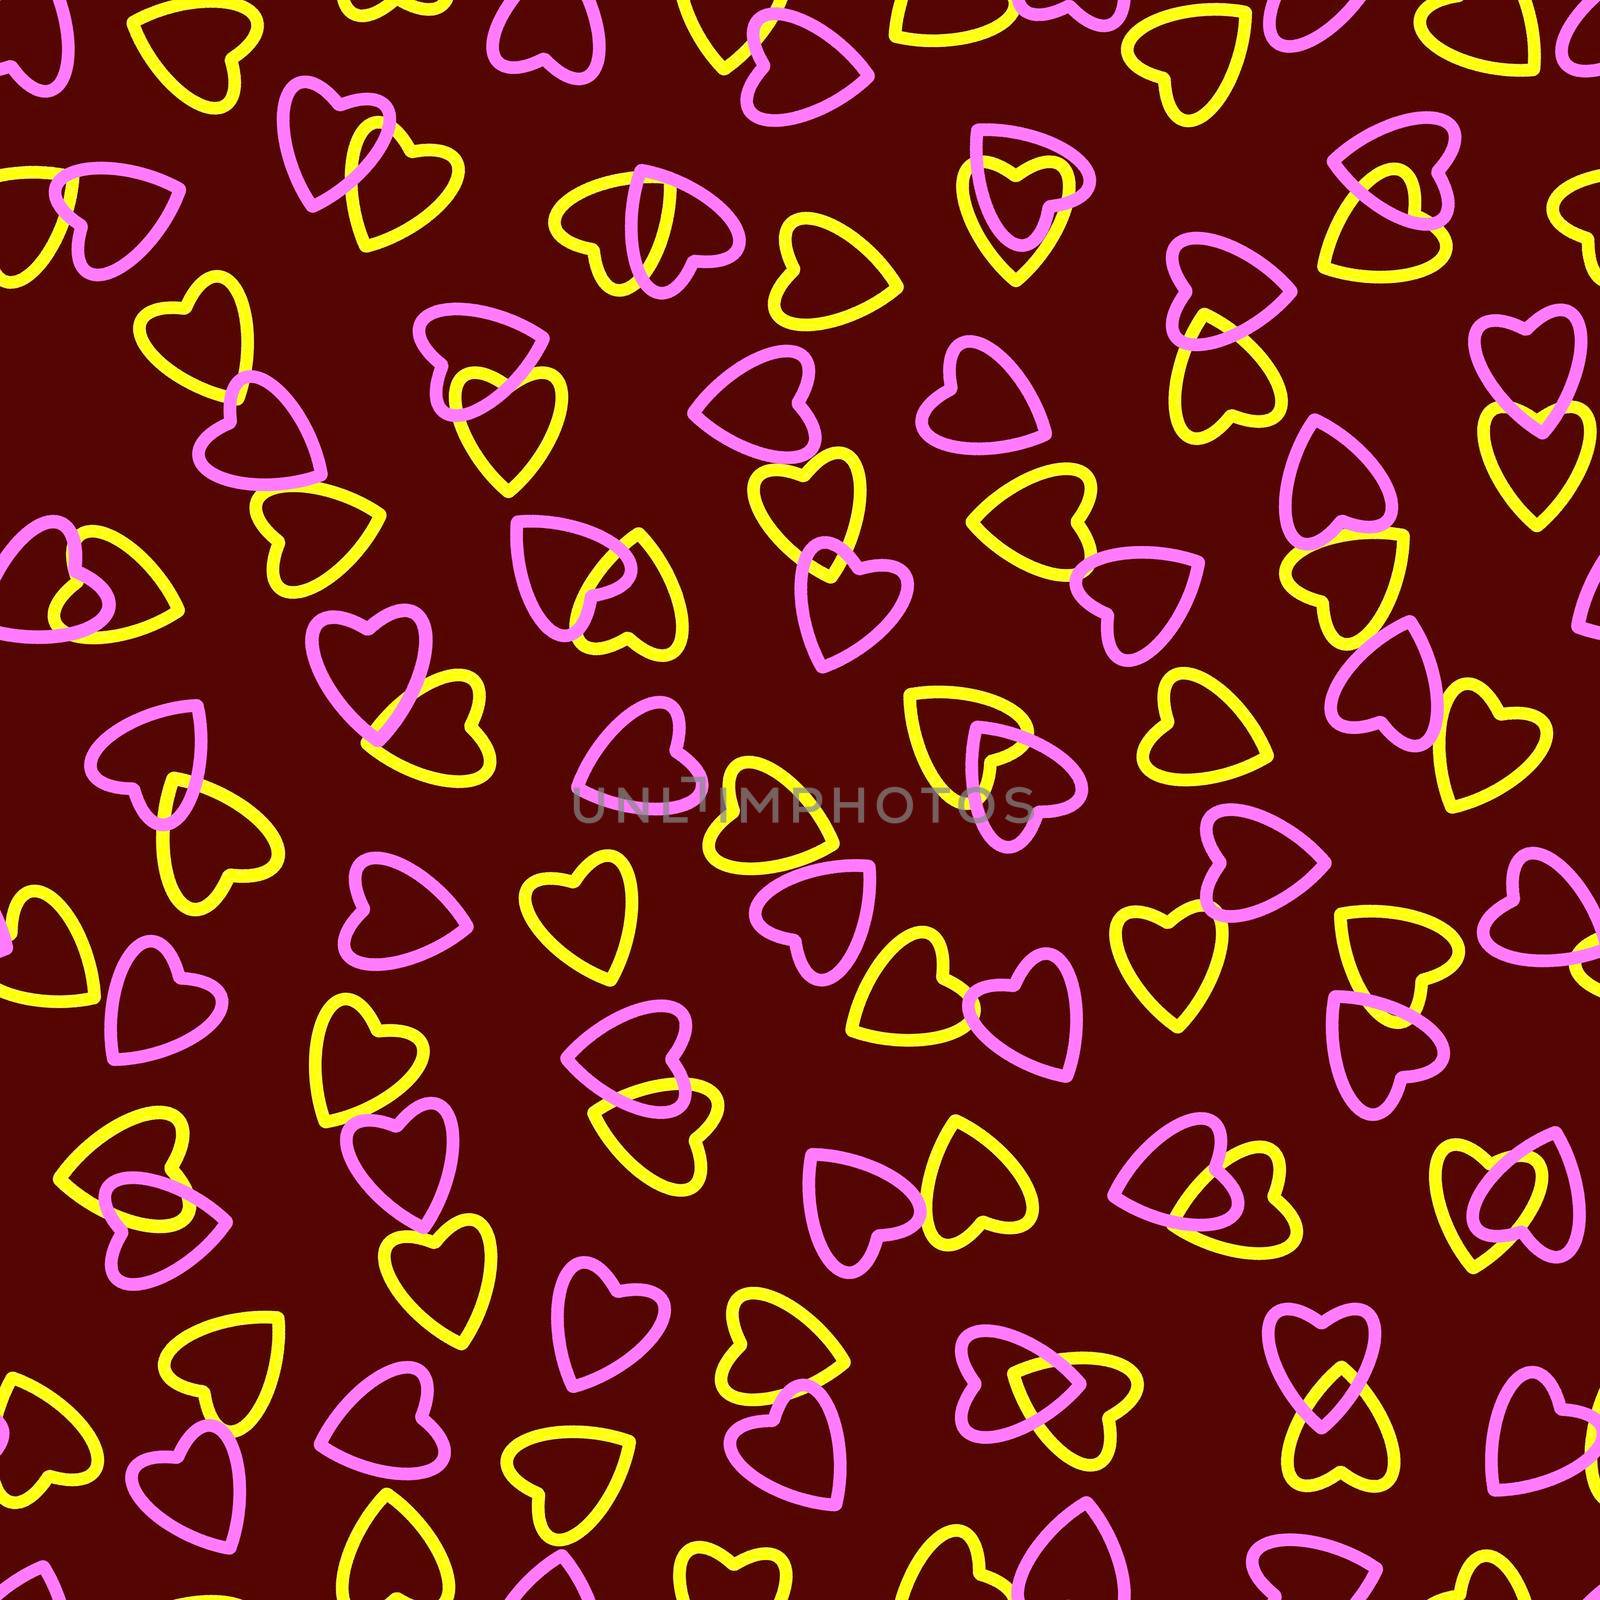 Simple heart seamless pattern,endless chaotic texture made tiny heart silhouettes.Valentines,mothers day background.Great for Easter,wedding,scrapbook,gift wrapping paper,textiles.Pink,yellow,burgundy by Angelsmoon